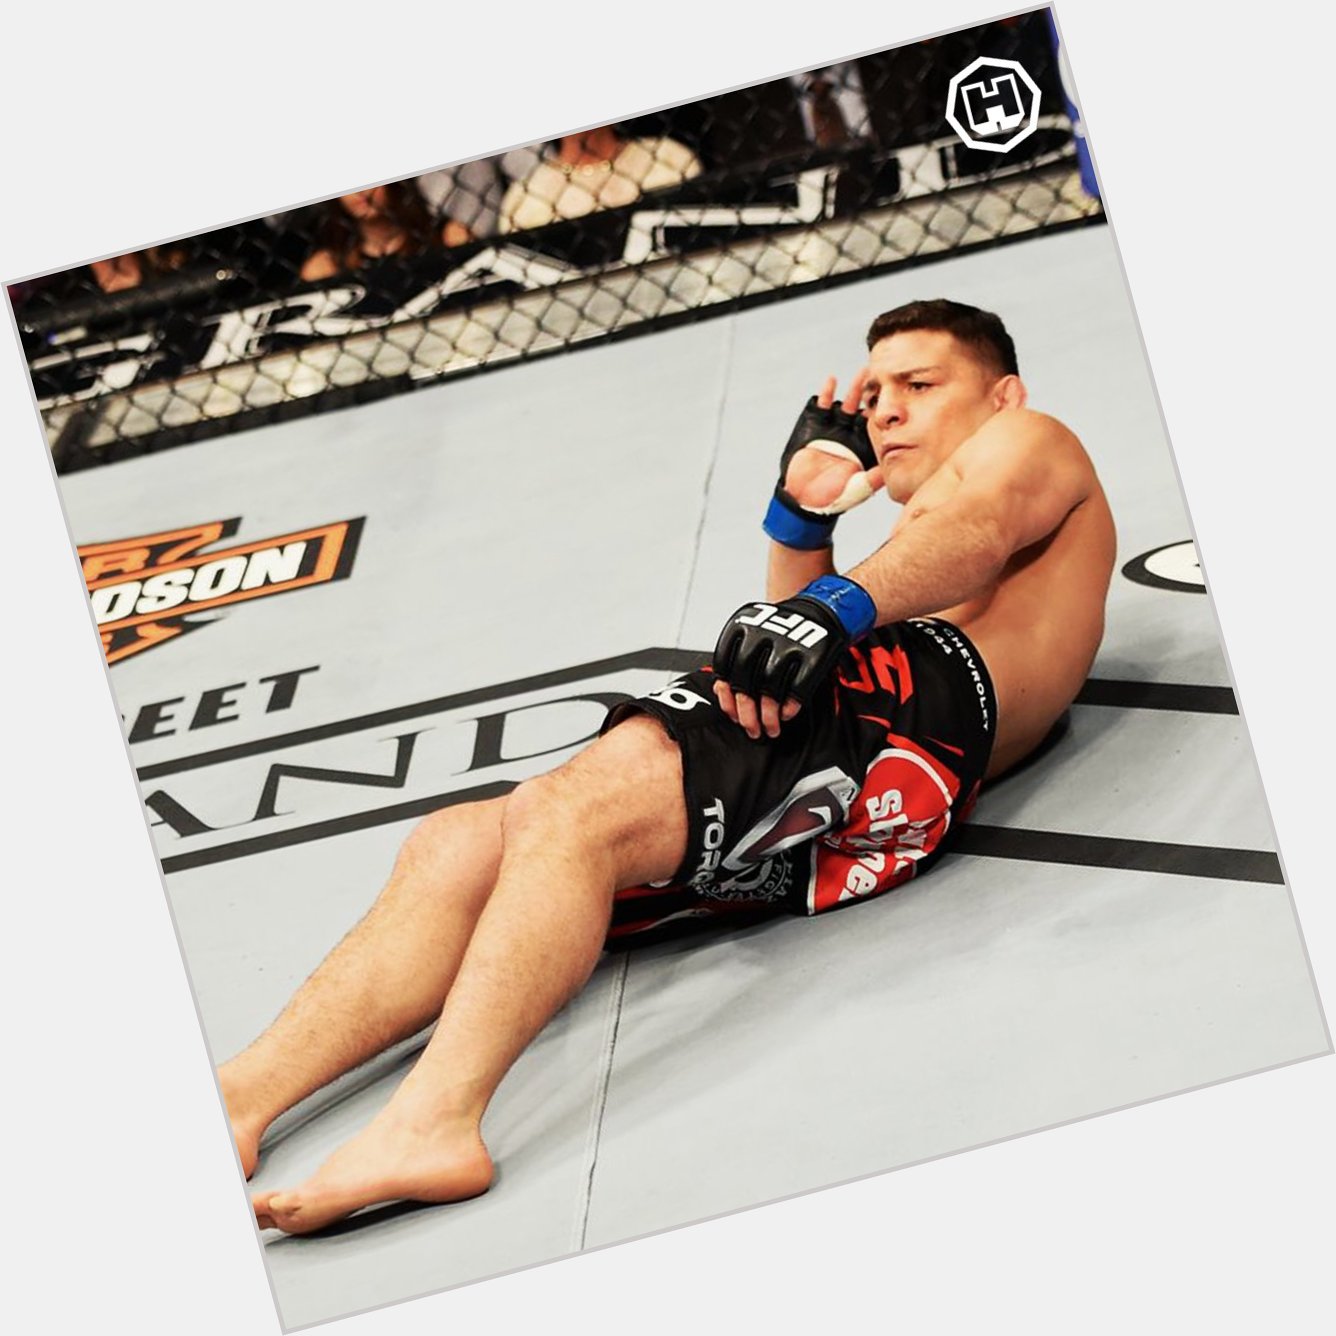 Join me in wishing Nick Diaz a happy 38th birthday. We are just 54 days from seeing this legend return to action 